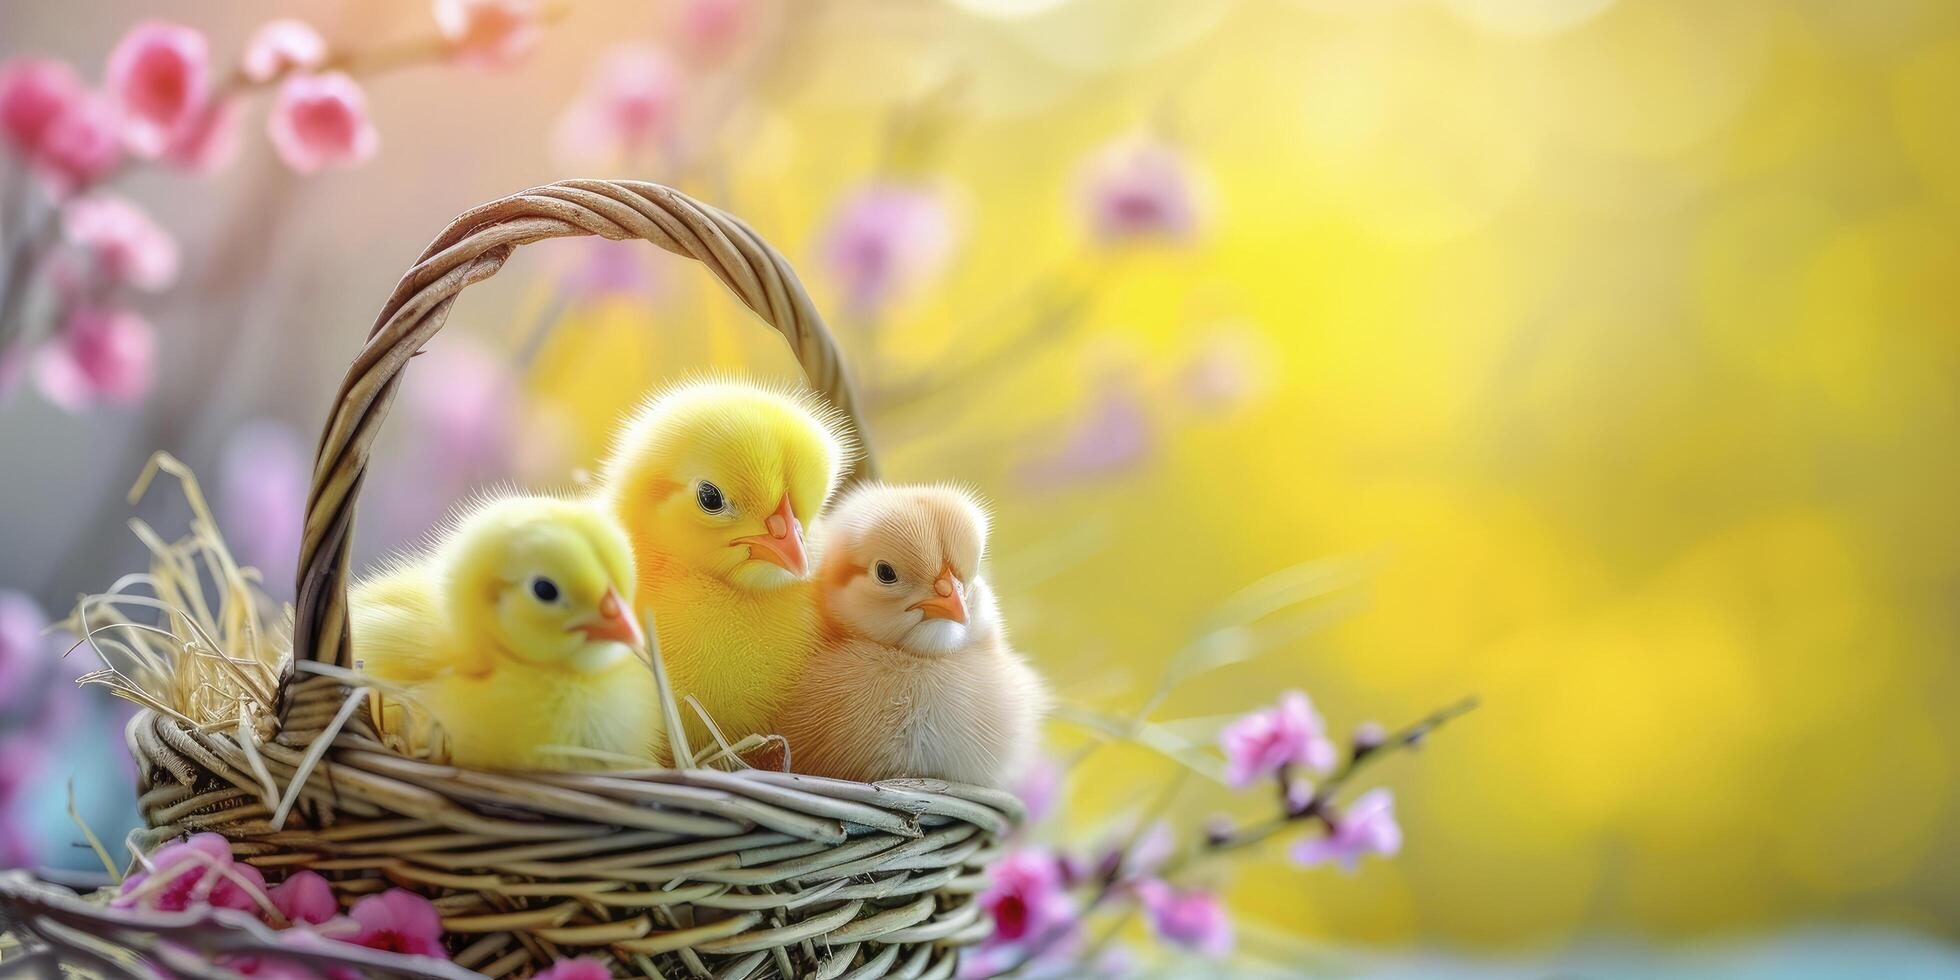 AI generated Adorable Fluffballs, Chicks Nestled in a Basket, Captured in a Bright and Colorful Photo, Radiating Warmth and Cheer. photo